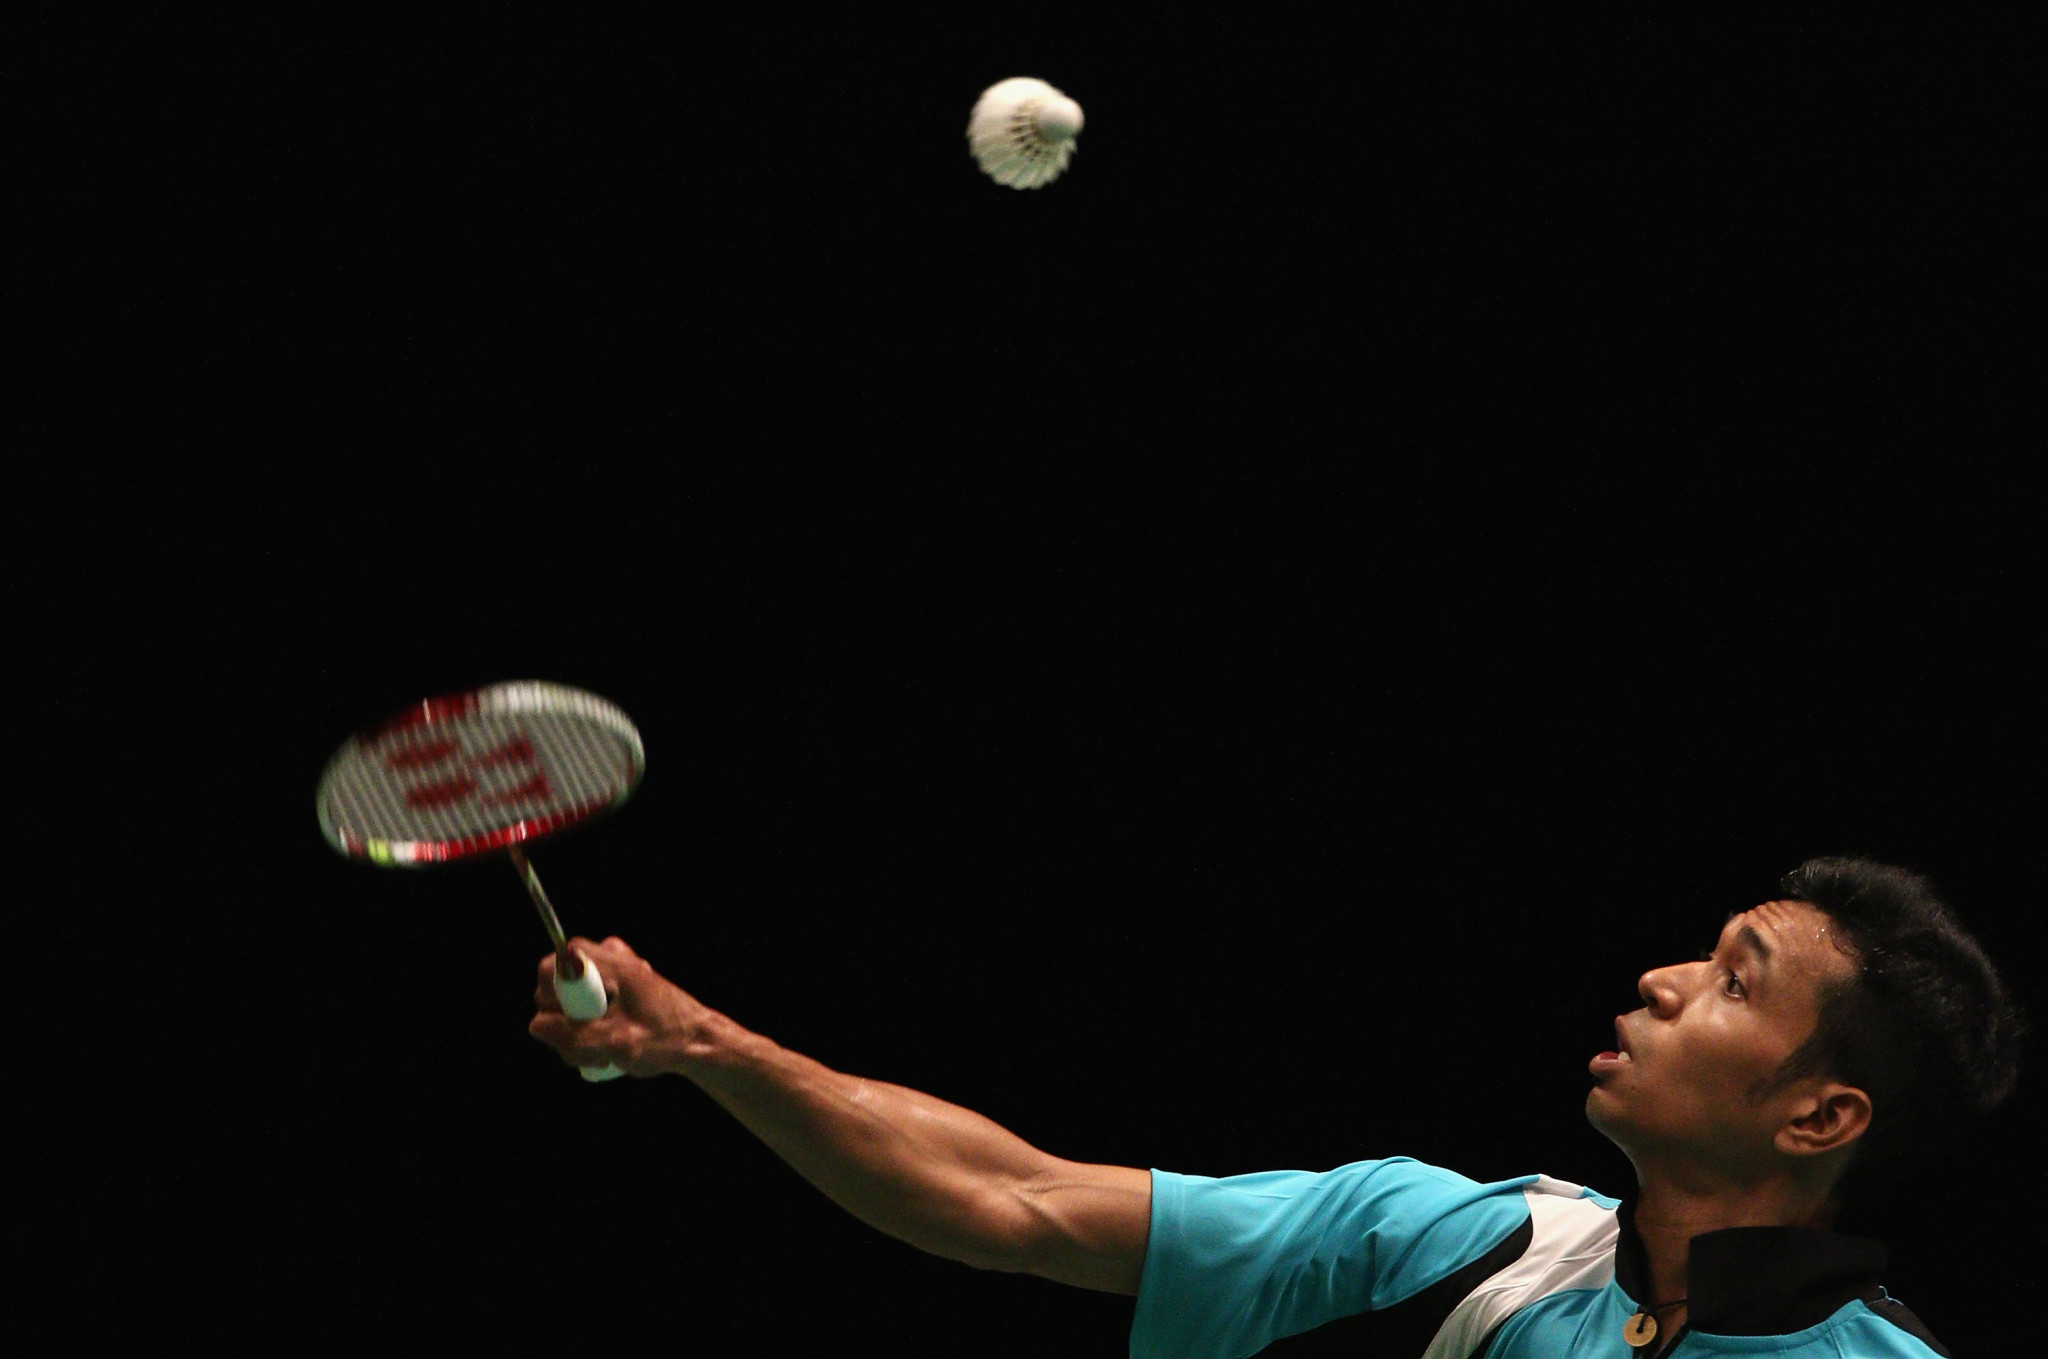 Malaysian badminton players given career-ending bans for match fixing